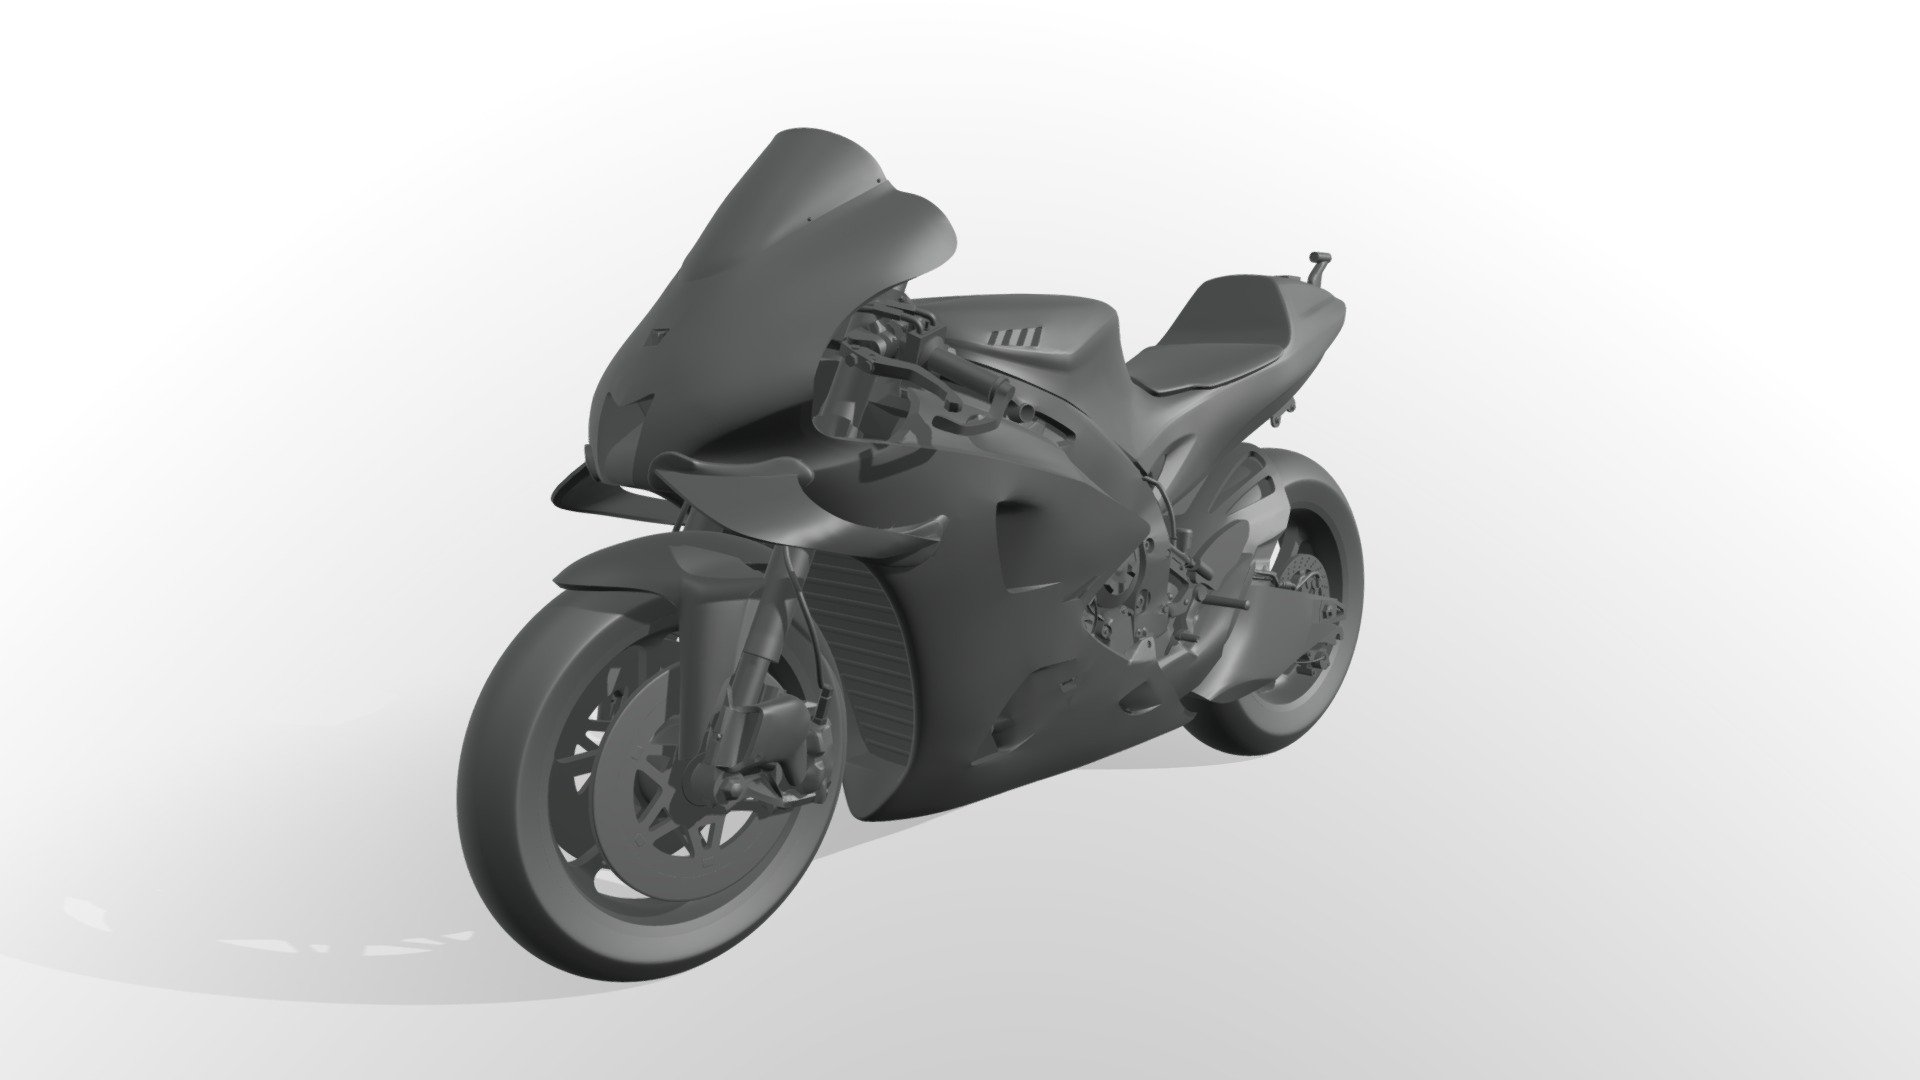 Yamaha YZF-M1 Racing 2020 Motorcycle 3D Model for Printing like a real one.
Its the bike that rides Valentino Rossi on MOTOGP ,which he won the most of titles.

This high-quality 3D model consists of files in StereoLithography (.Stl) format
that is optimized for 3D printing.
The files are suitable for FDM , SLA and SLS 3d printers.

The Model it available tree type of print:

1)